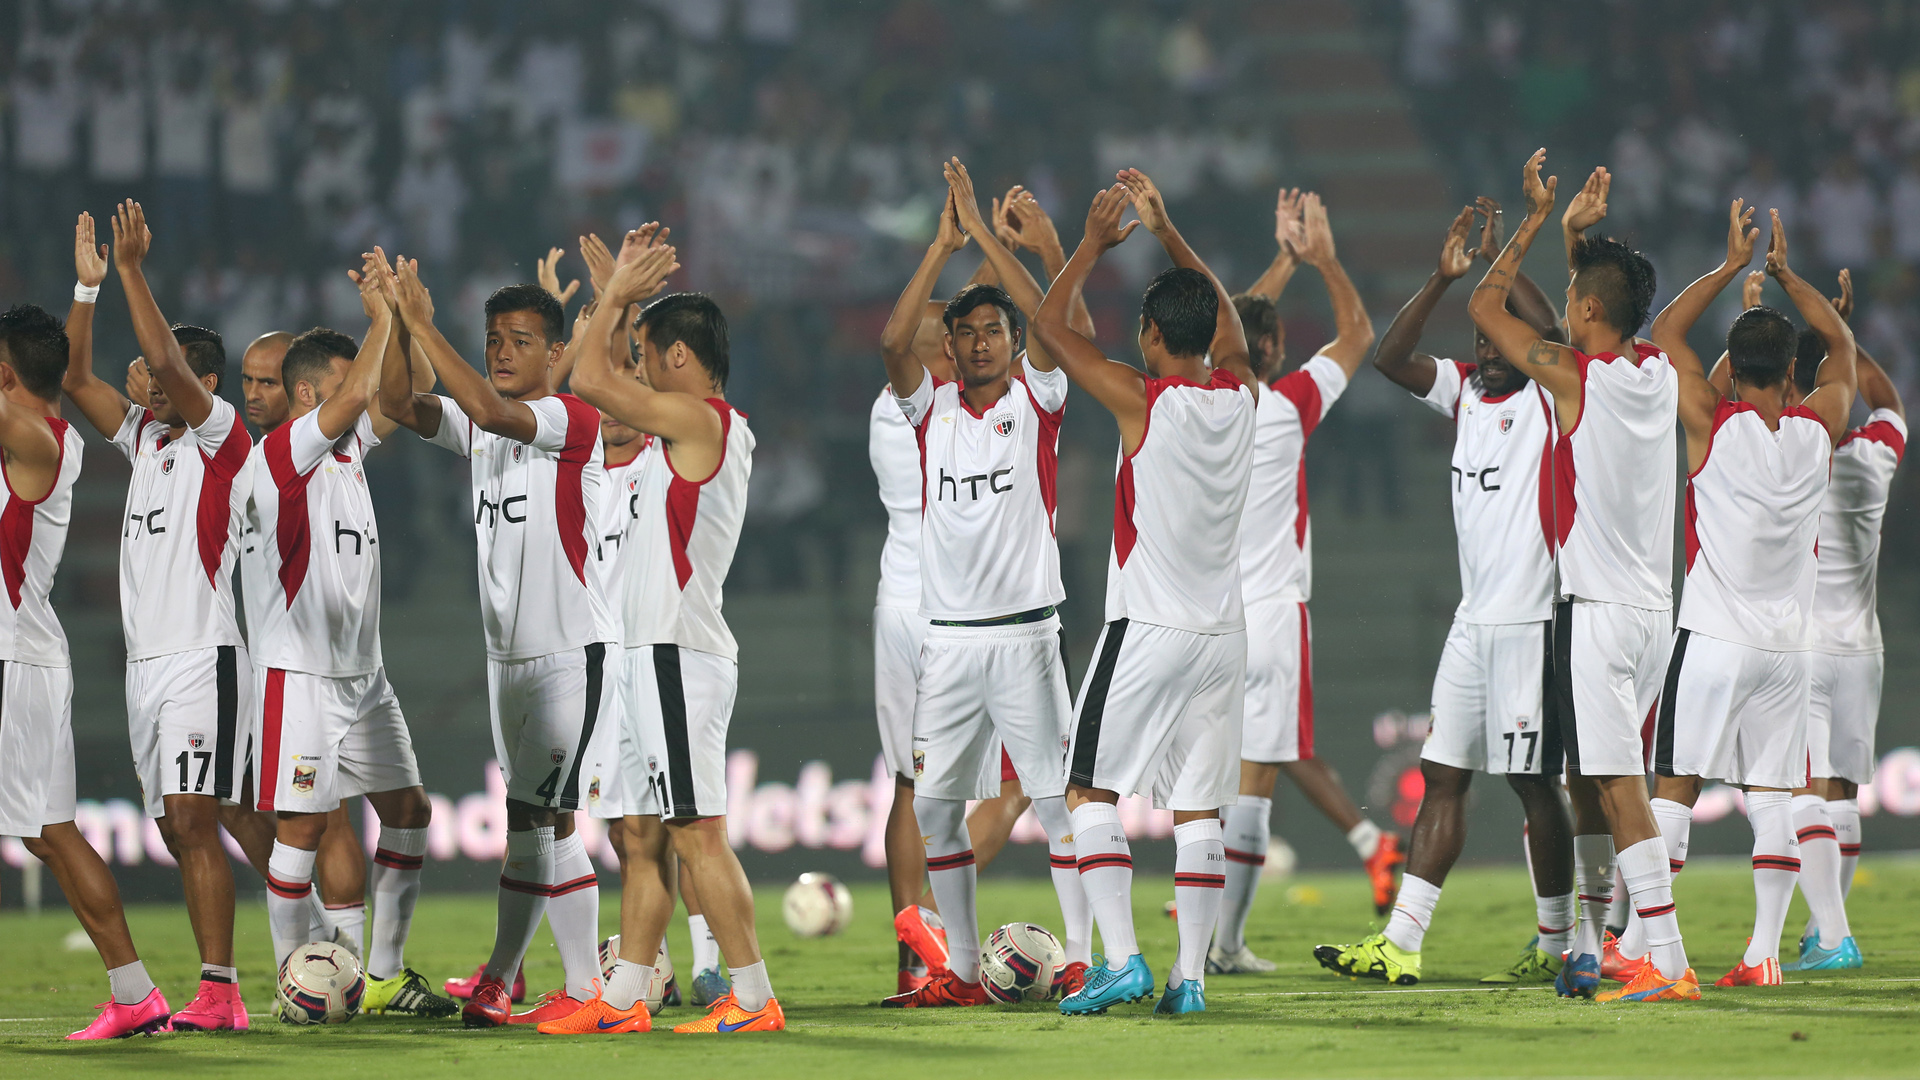 Northeast United Fc Players Waves Towards The Crowd - North East United Fc 2018 19 Player List , HD Wallpaper & Backgrounds